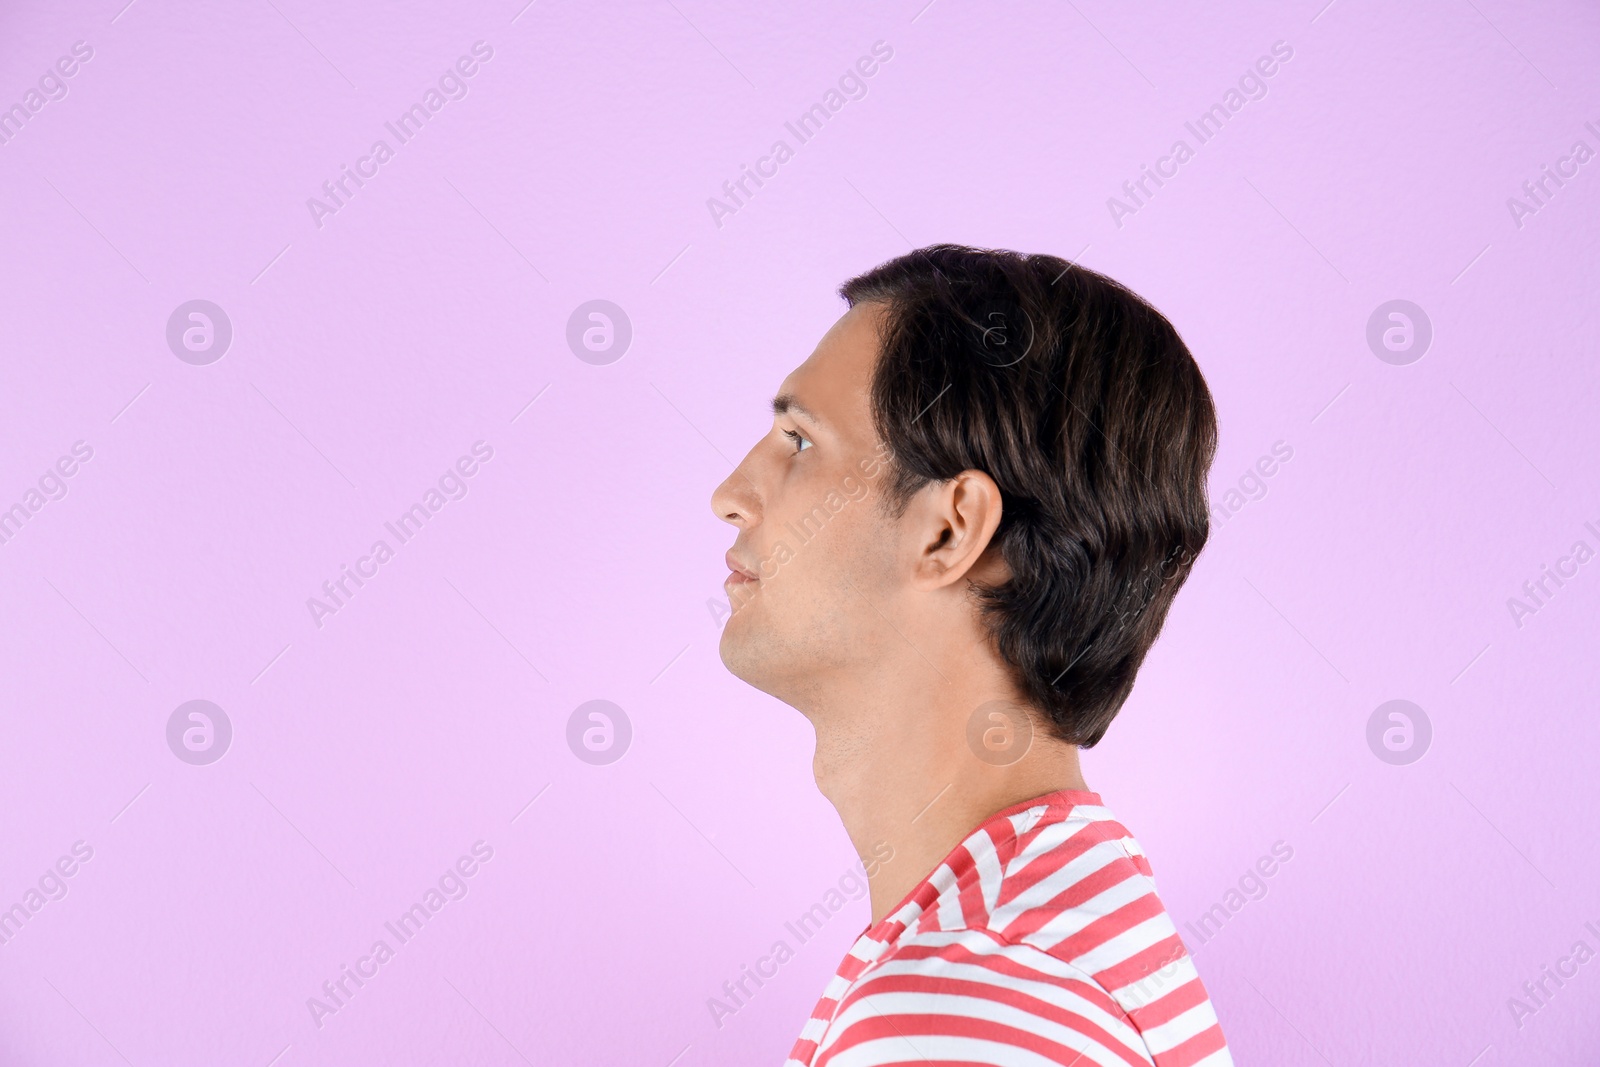 Photo of Young man on color background with copy space text. Hearing problem